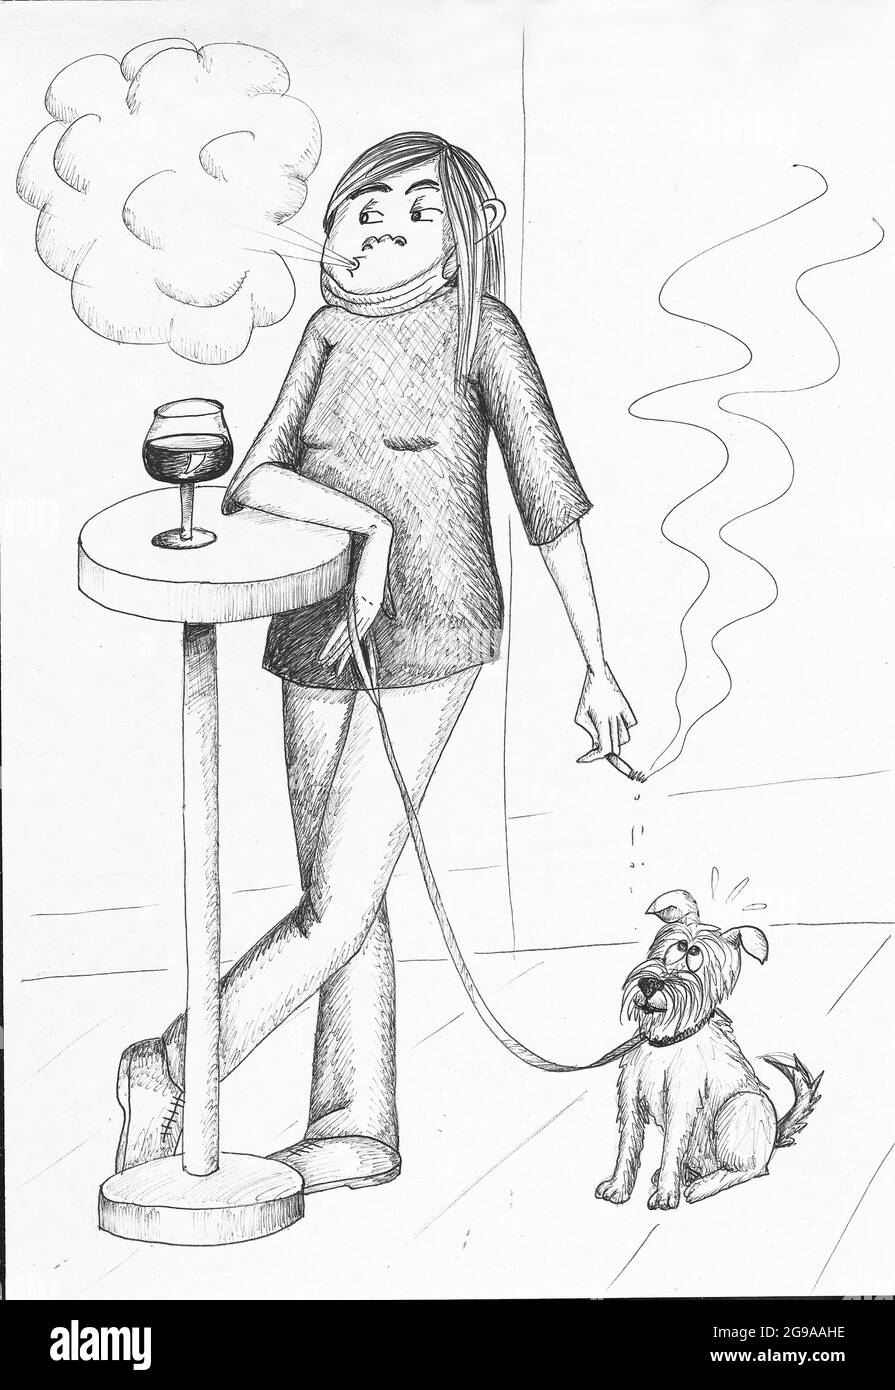 Smoker drinking wine with her dog. Illustration. Stock Photo